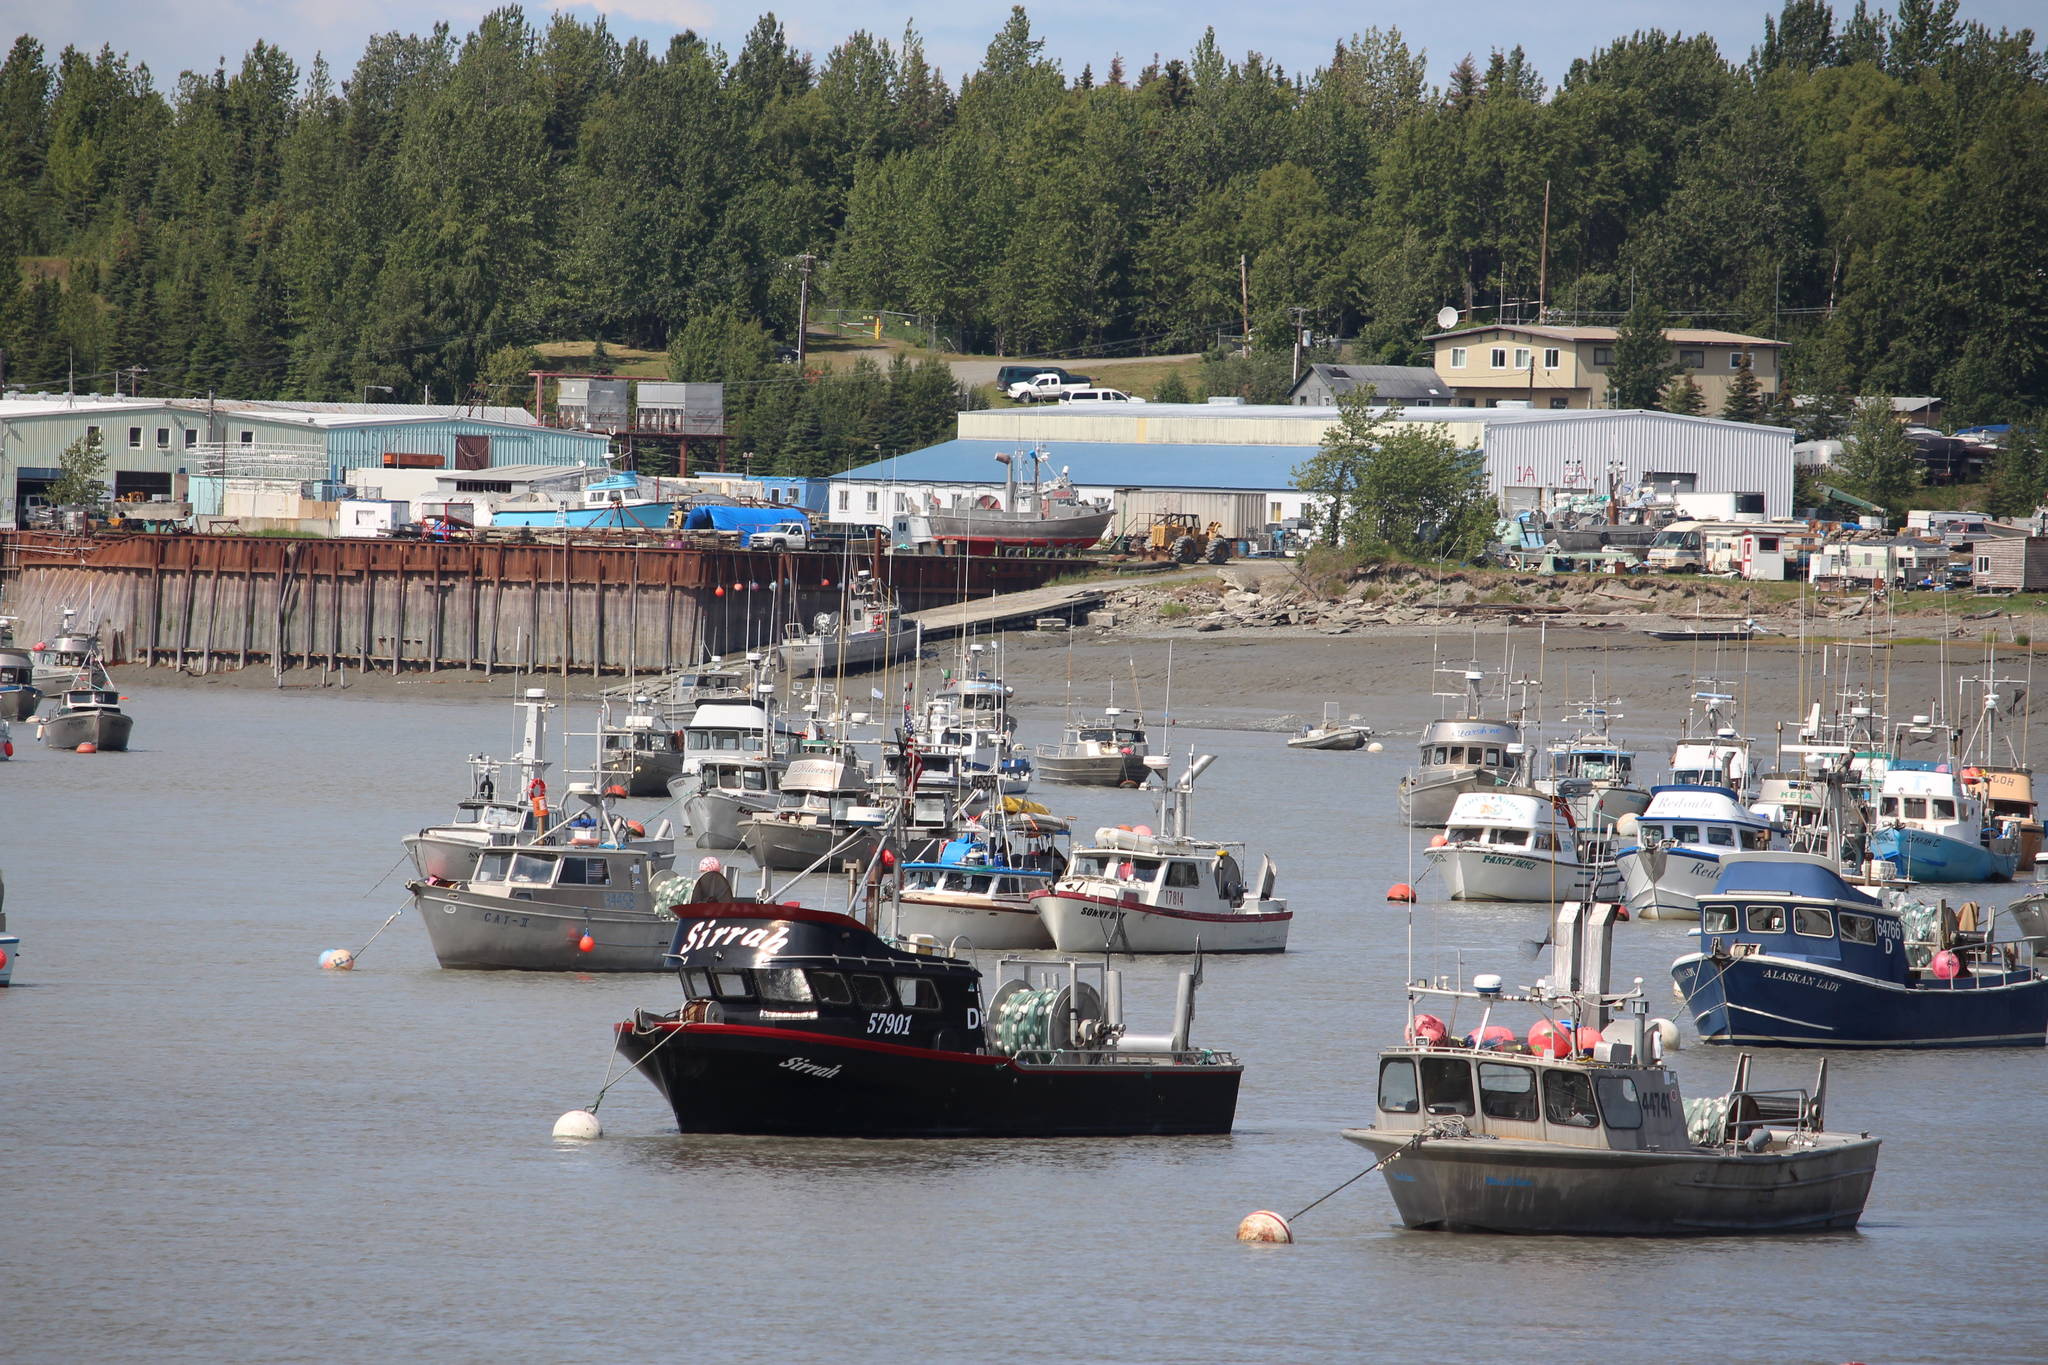 Commercial fishing vessels are seen on the Kenai River on July 10, 2020. (Photo by Brian Mazurek/Peninsula Clarion)